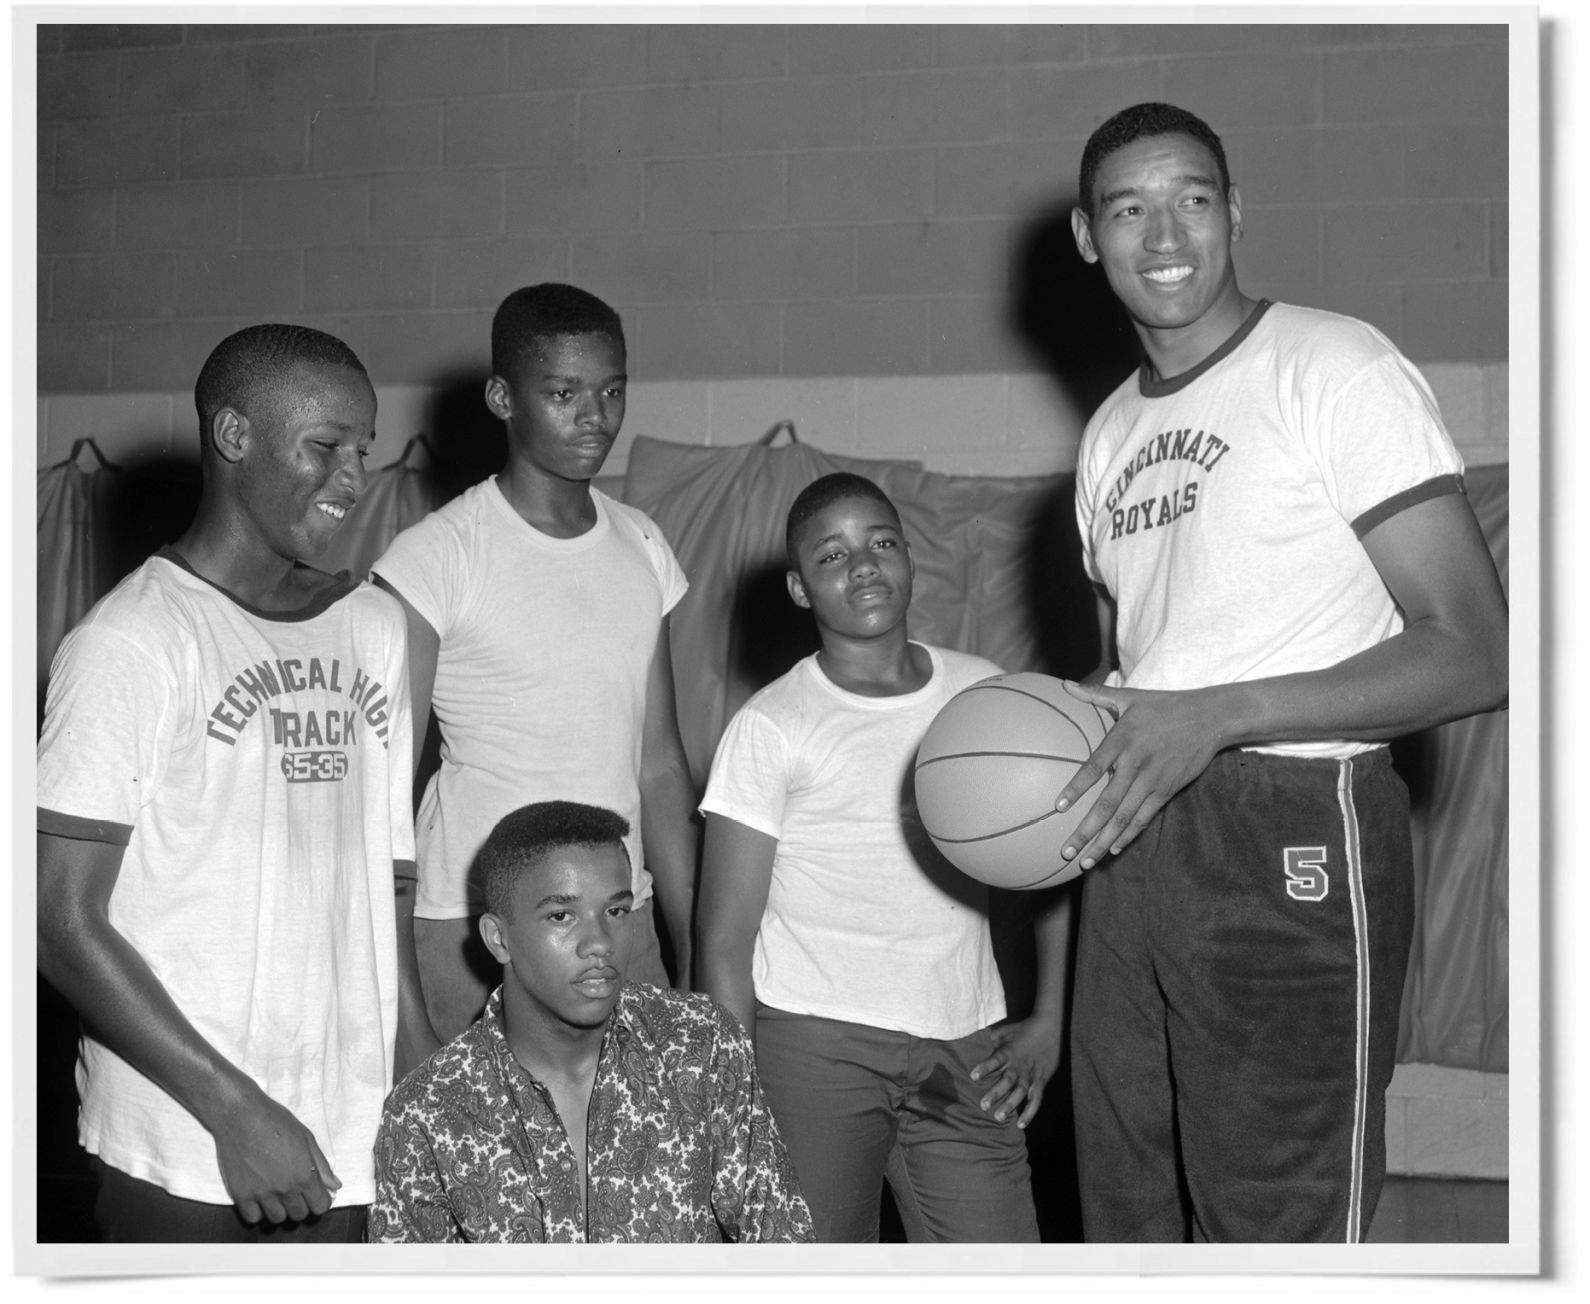 Back in the day, Jan. 6, 1969: Bob Boozer night held at Civic